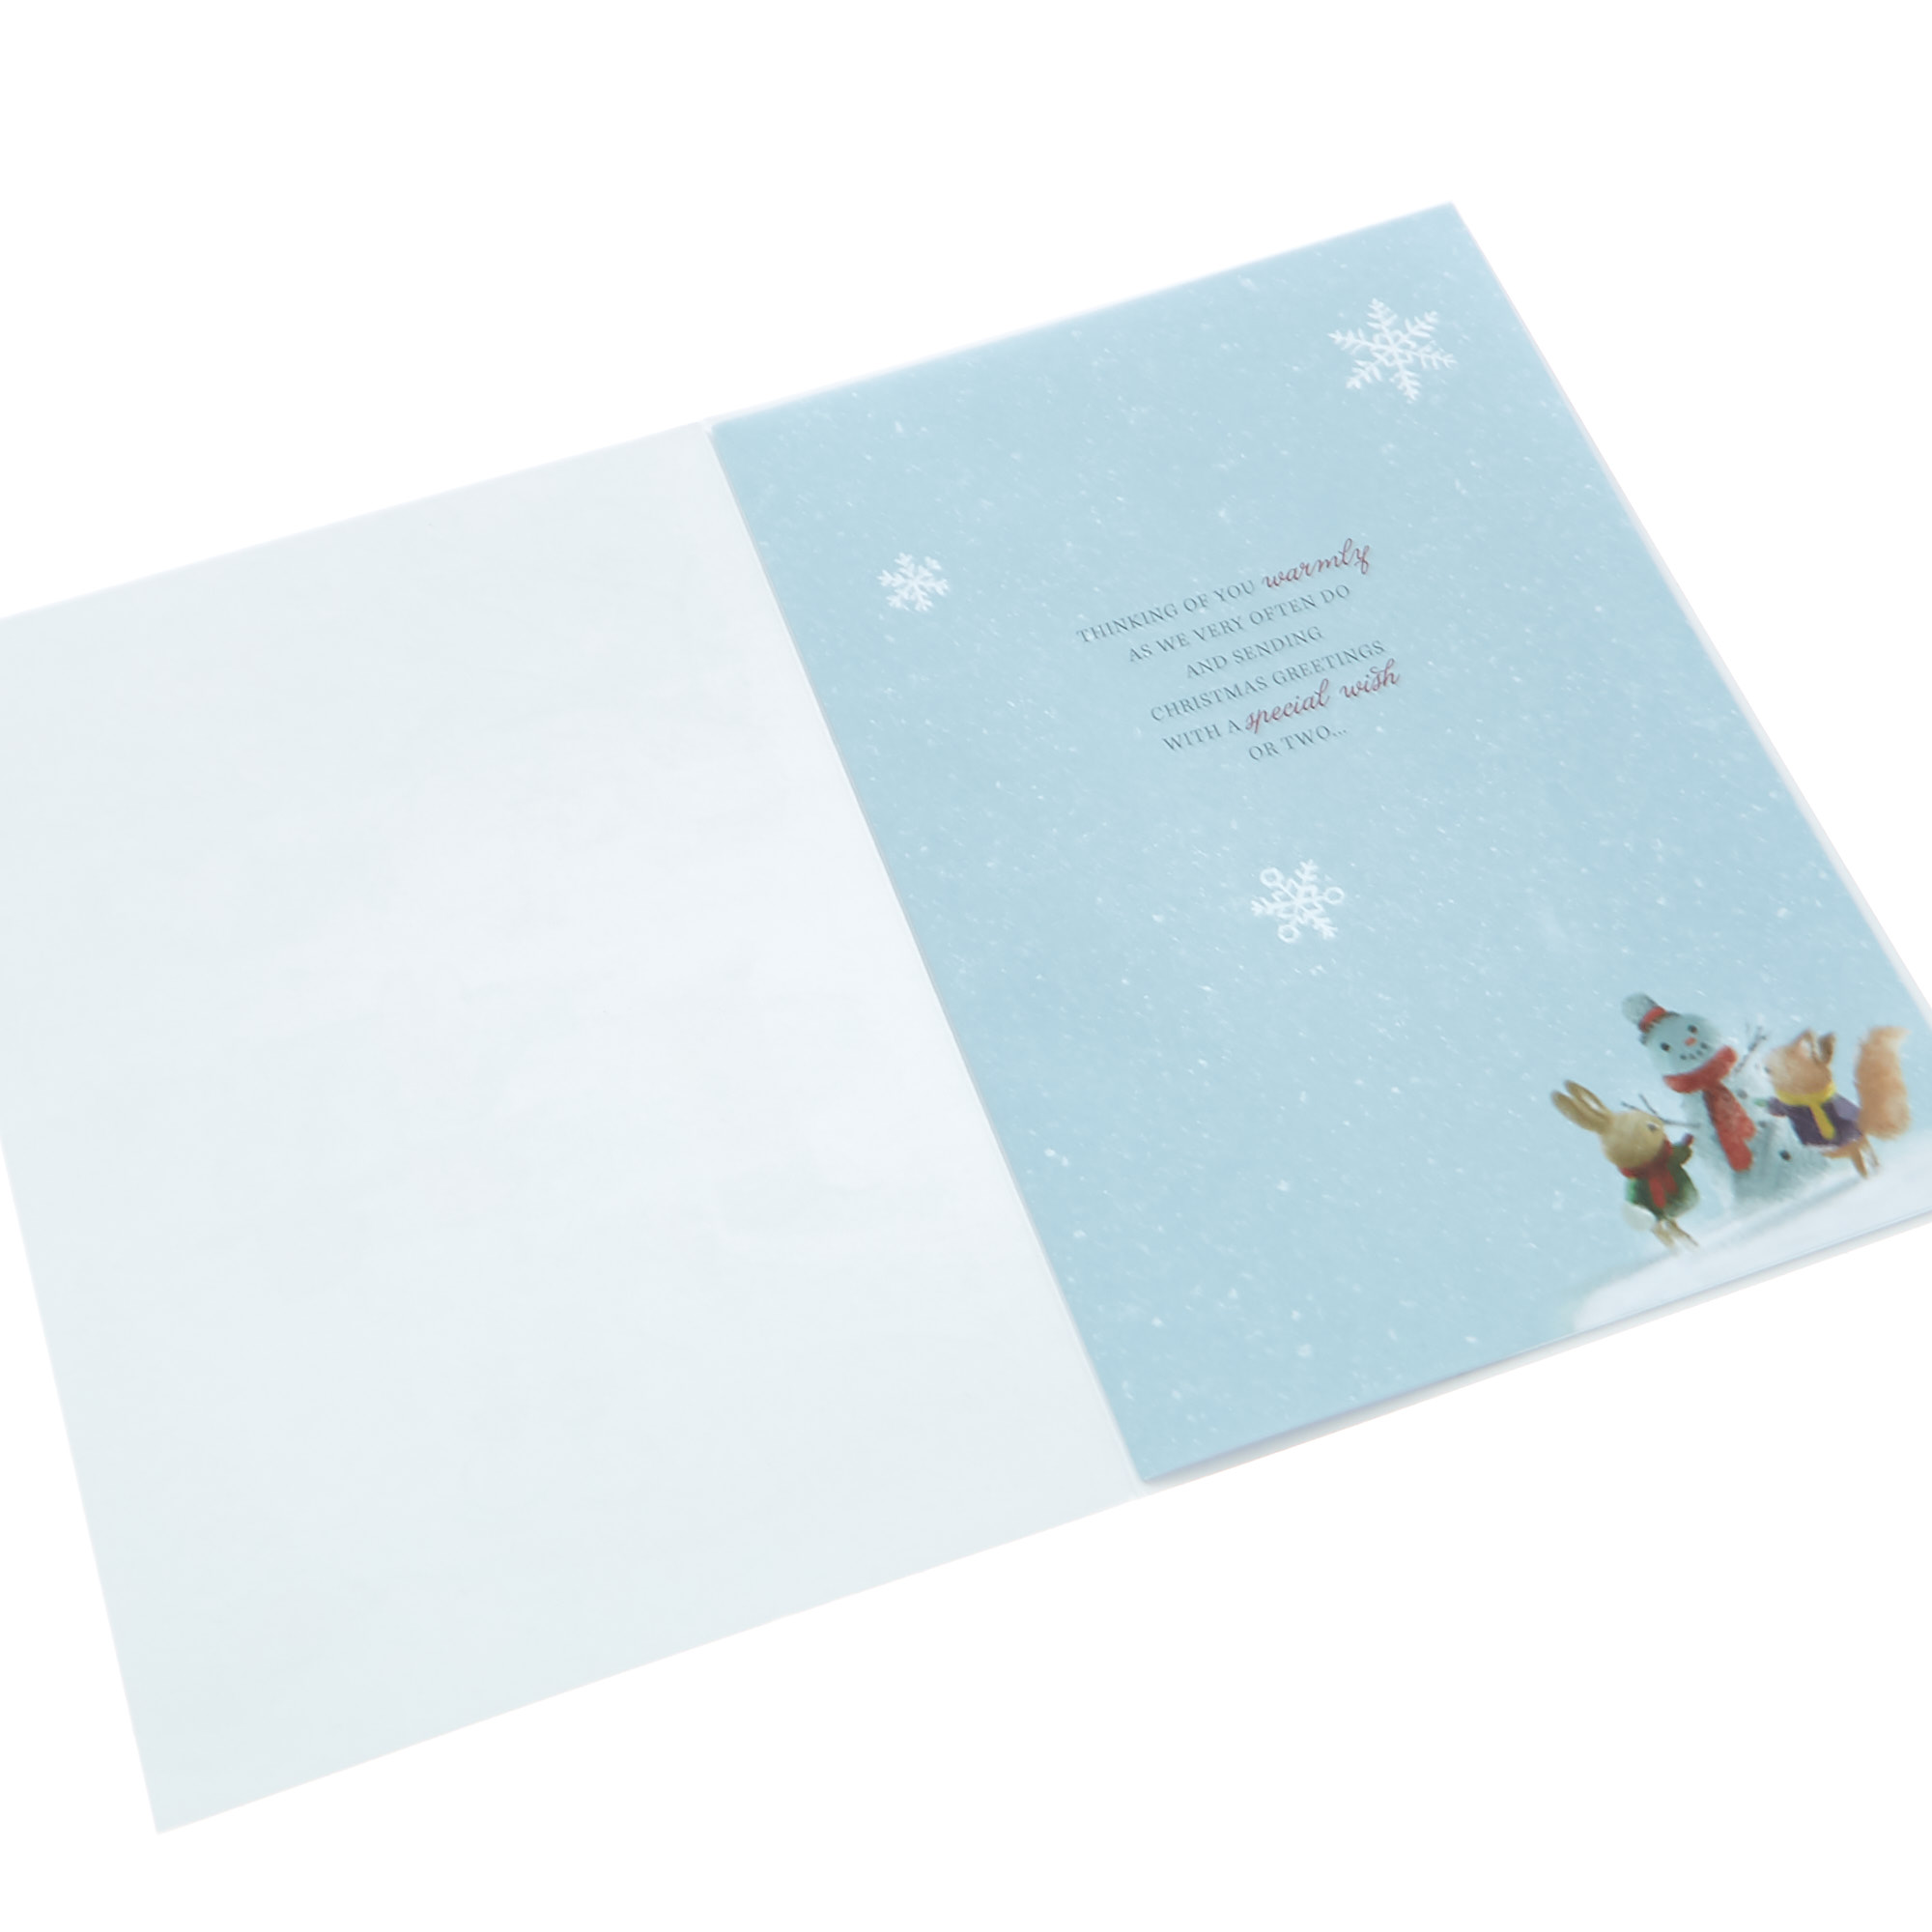 Christmas Card - To Special Friends